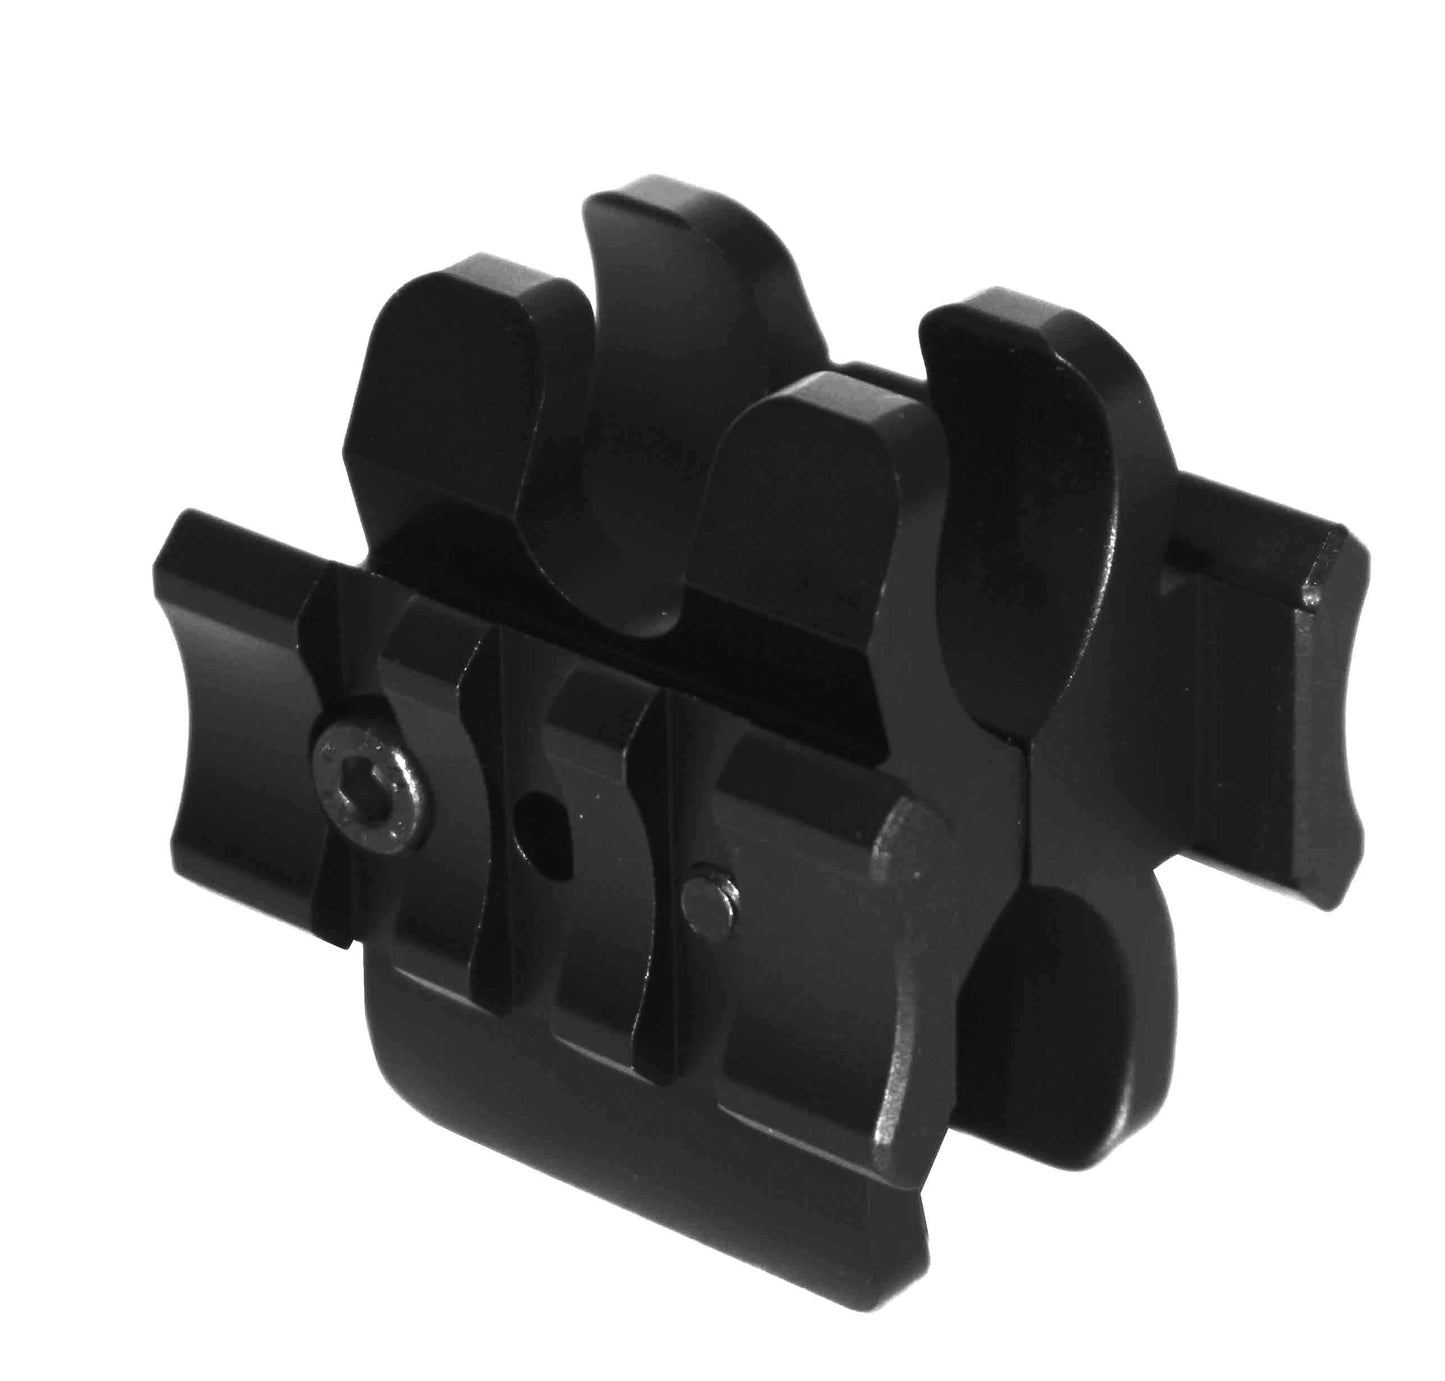 Mossberg 590a1 12 gauge pump aluminum mount with 2 side picatinny rails.